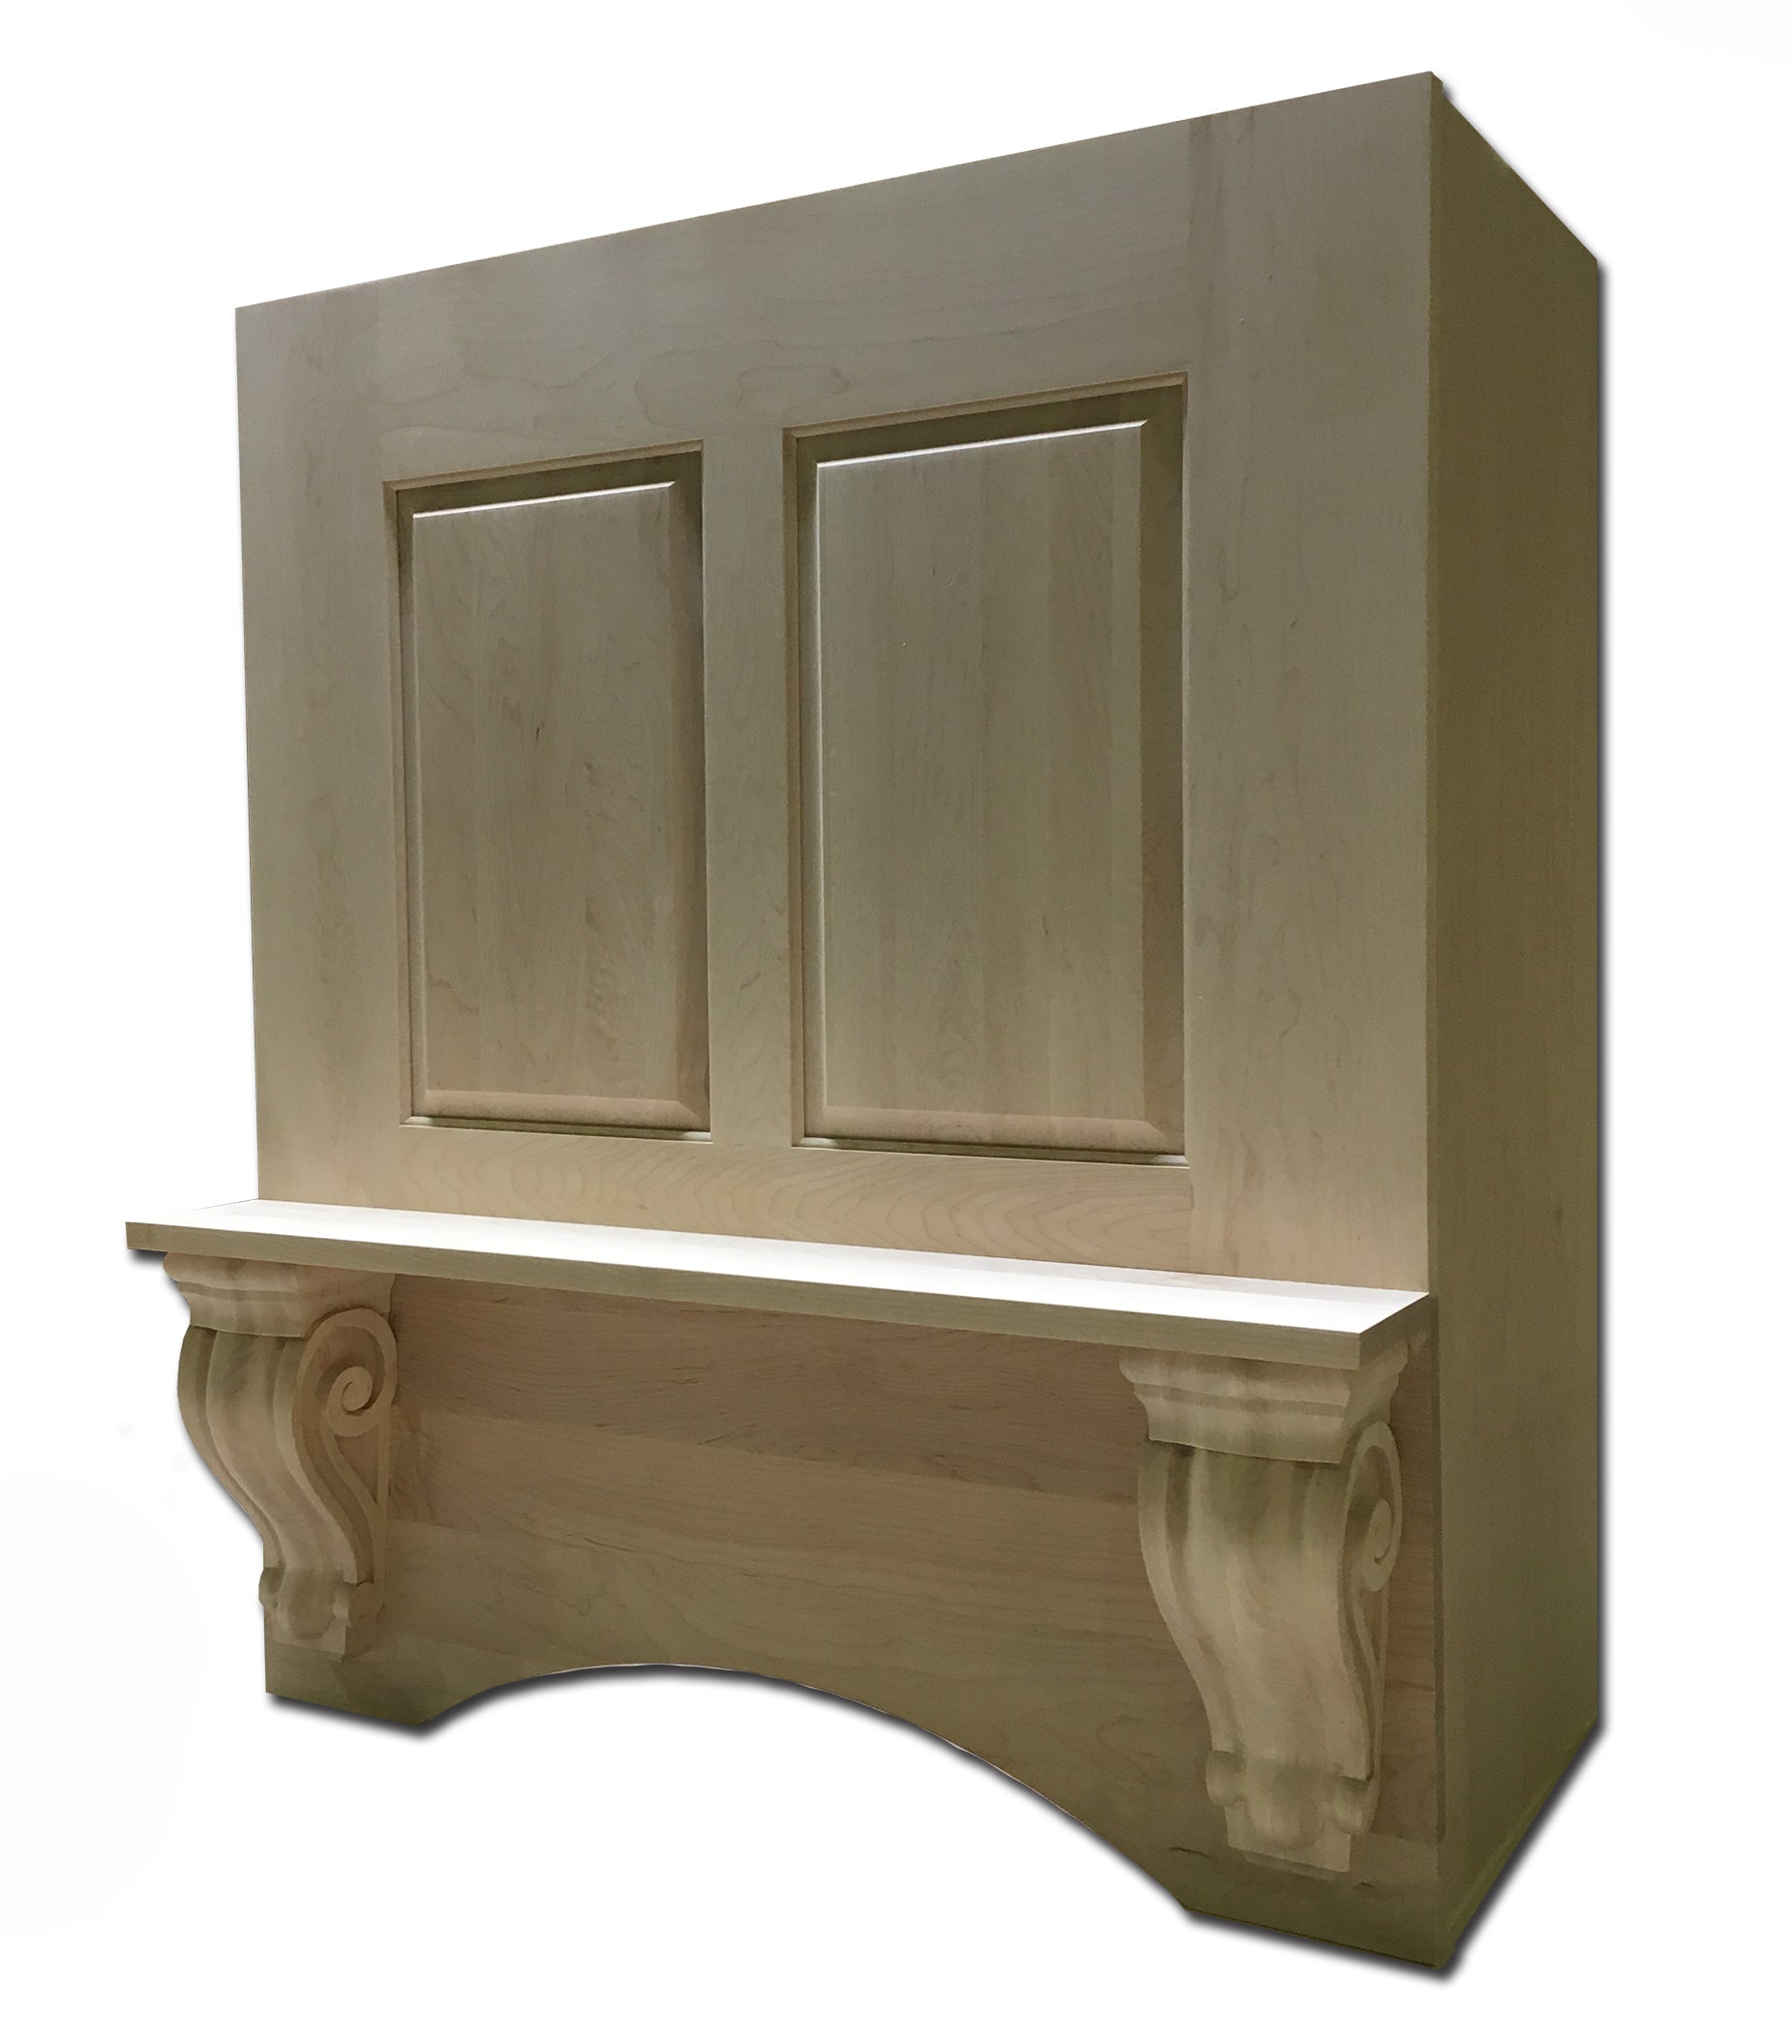 Castlewood Connoisseur Mantel Range Hood with Plain Valance and Classic Corbels